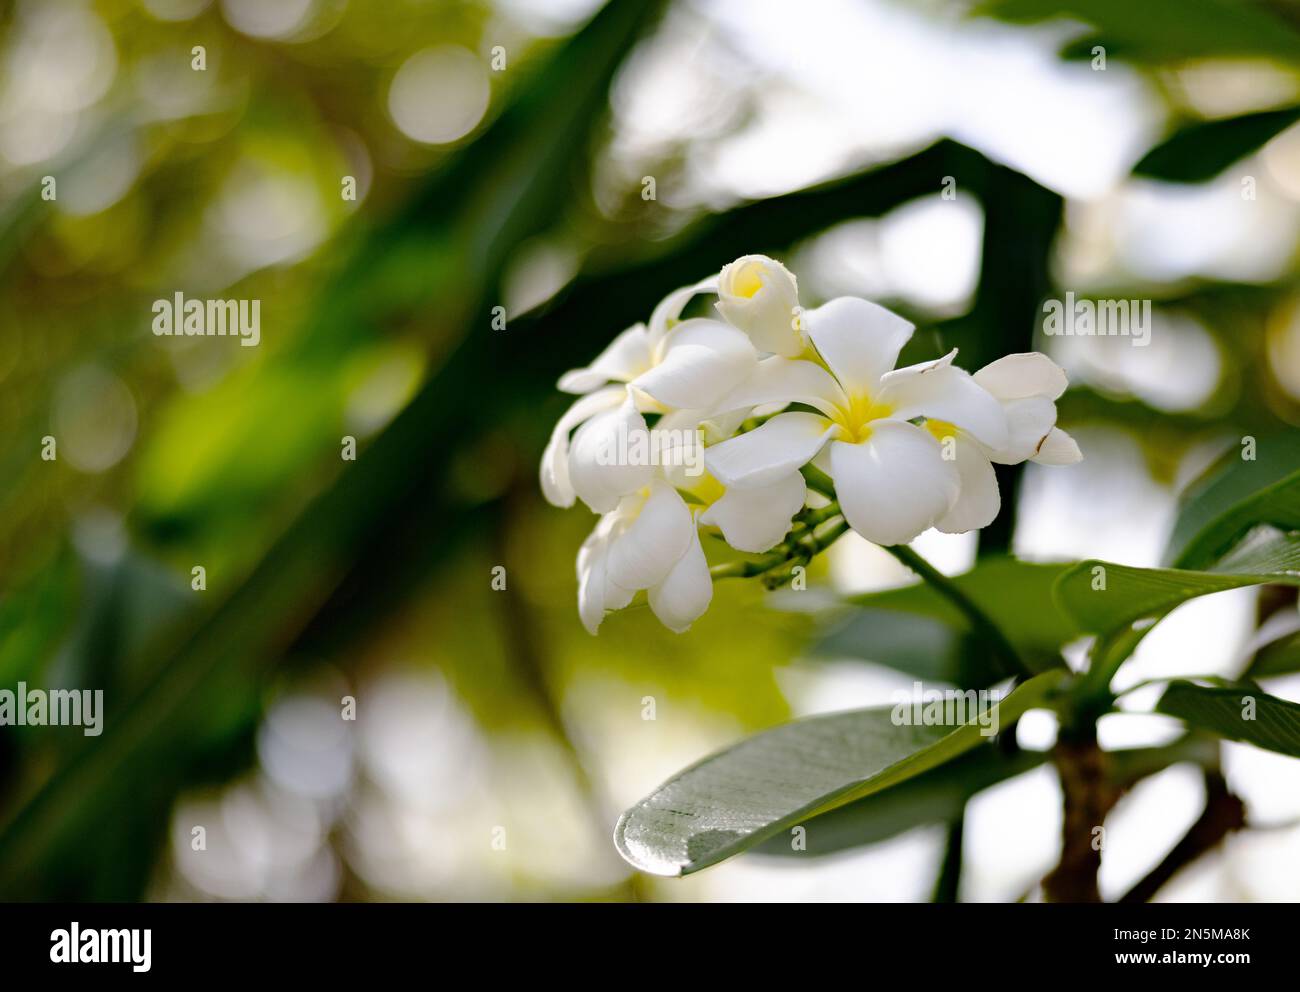 Plumeria, also known as Frangipani flowers on a tree flowering in the Maldives Stock Photo